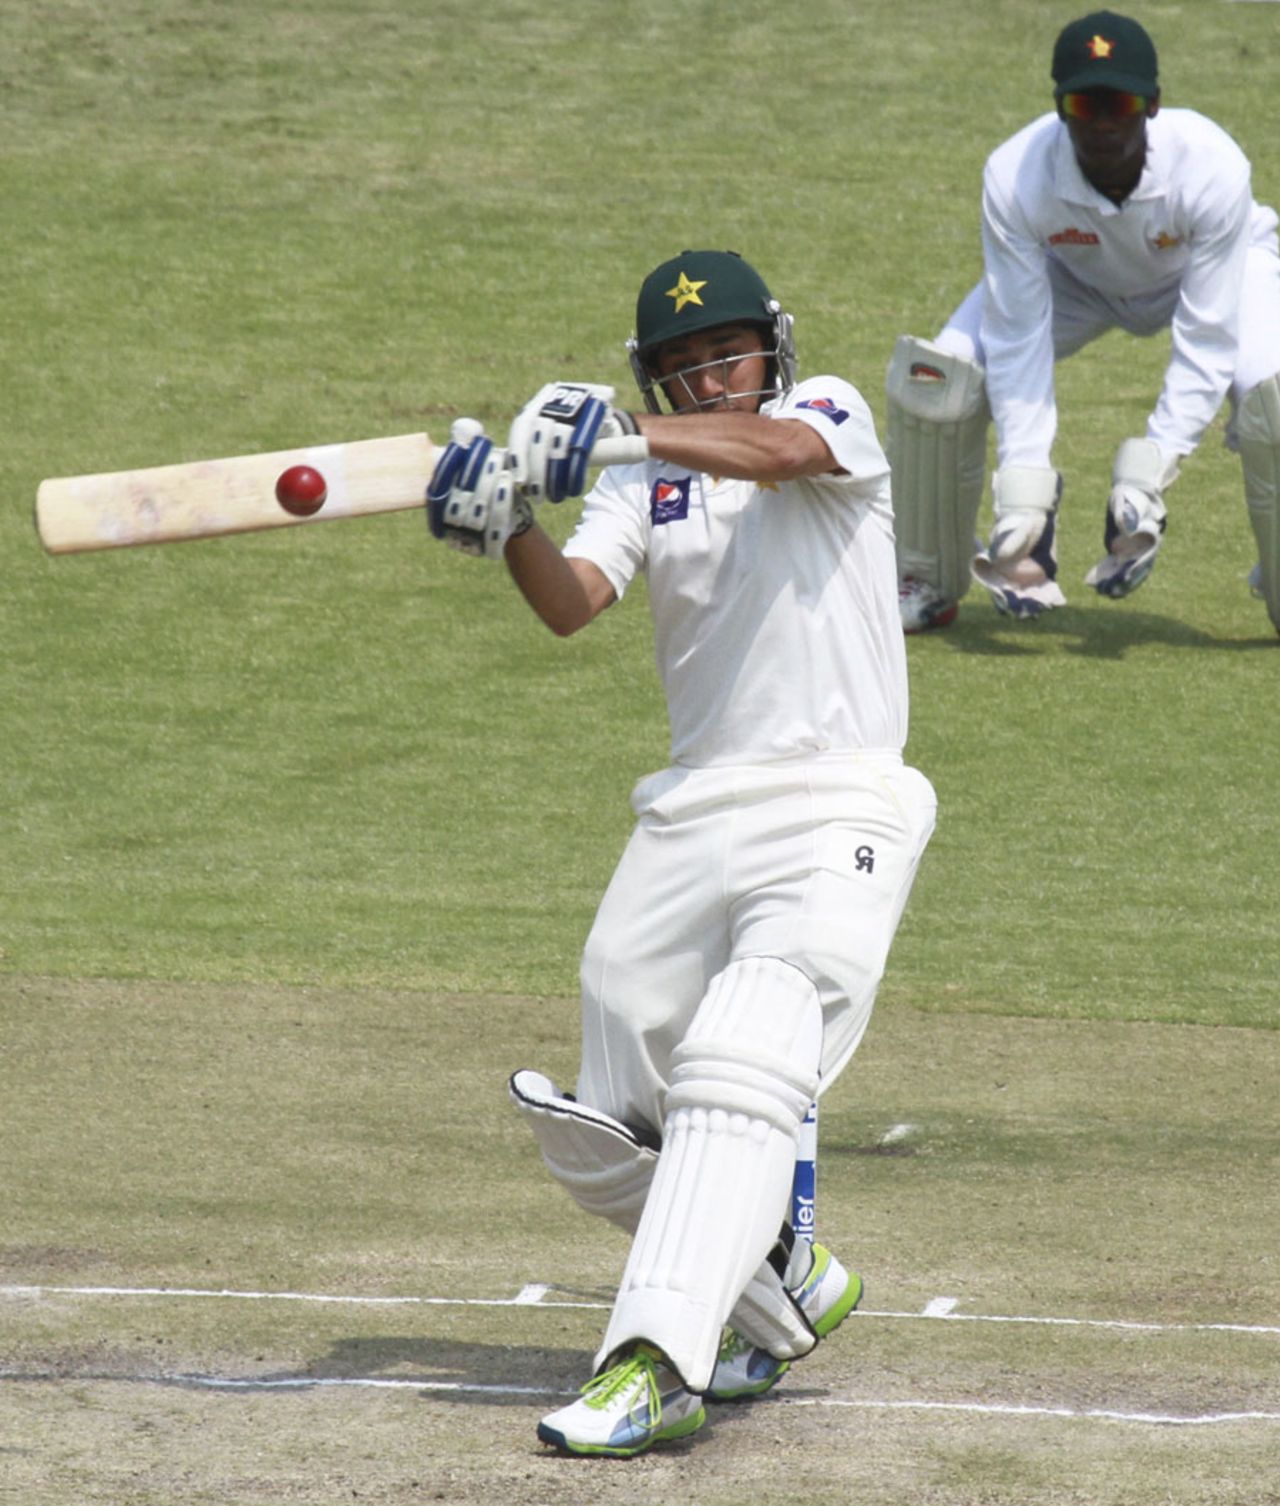 Saeed Ajmal looks to pull the ball, Zimbabwe v Pakistan, 2nd Test, Harare, 3rd day, September 12, 2013